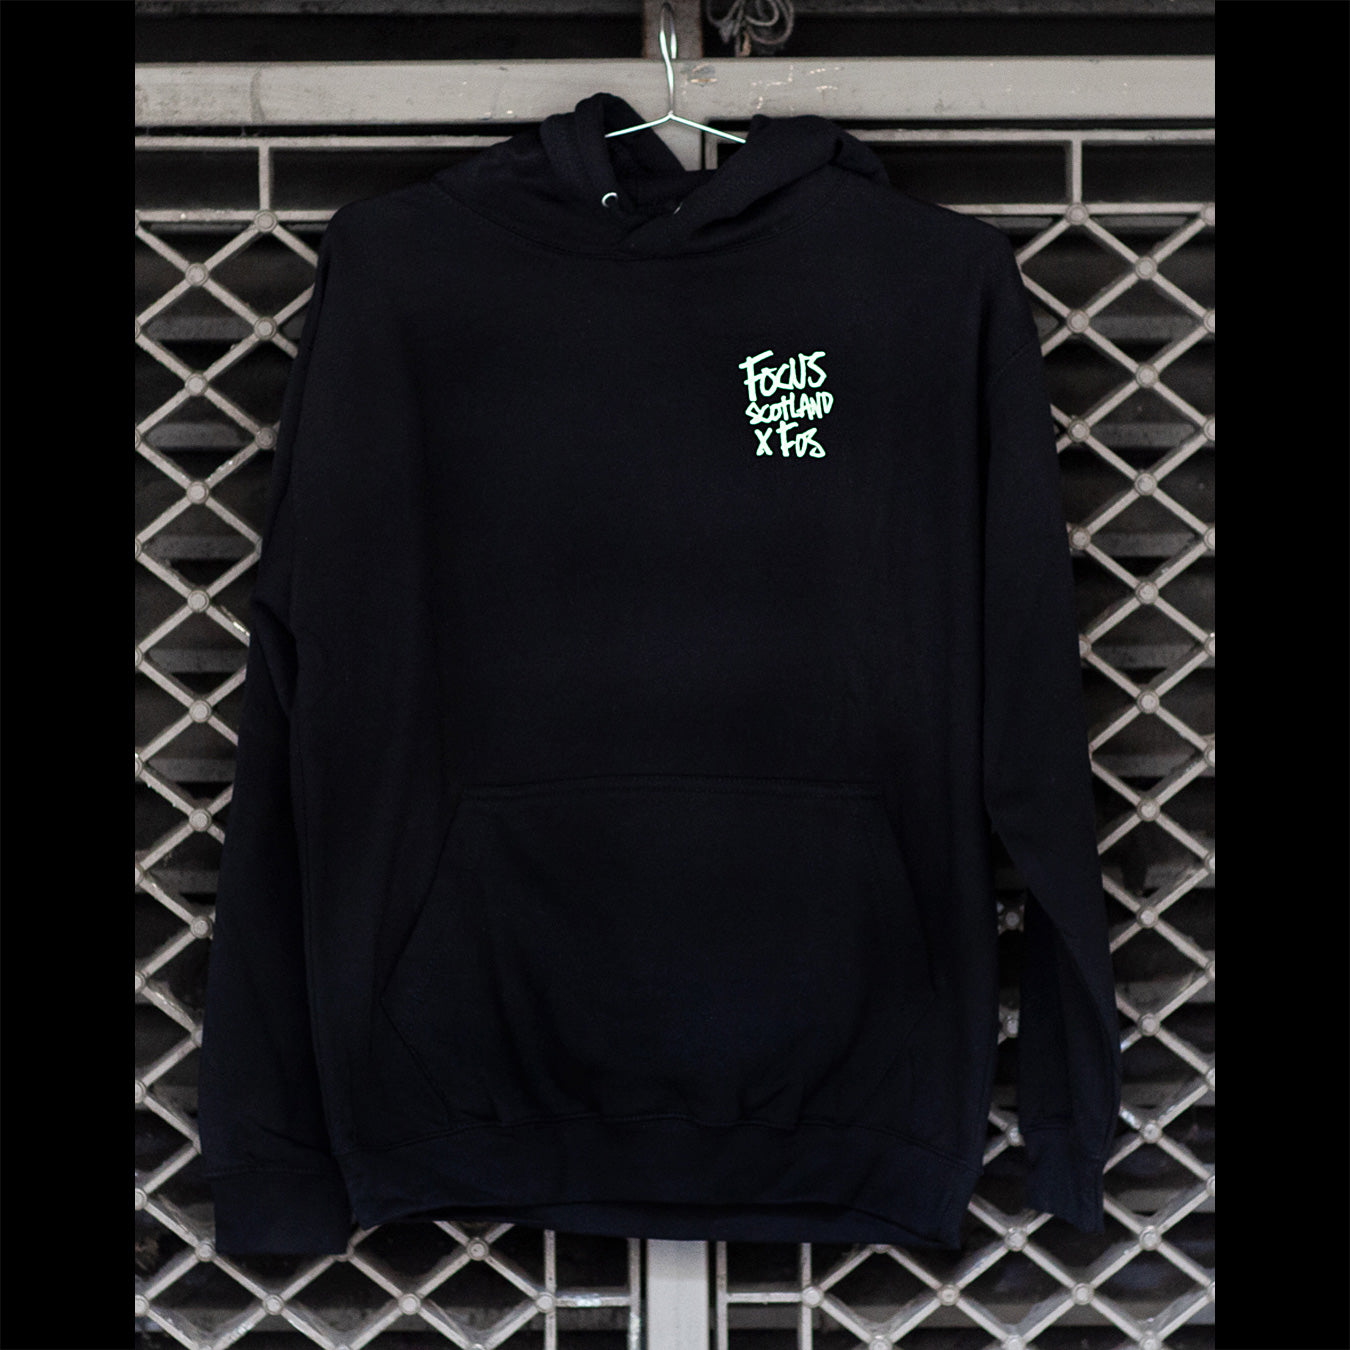 Focus x Fos The Mad Monk Of Cowgate Hooded Sweatshirt - Black/Glow In The Dark